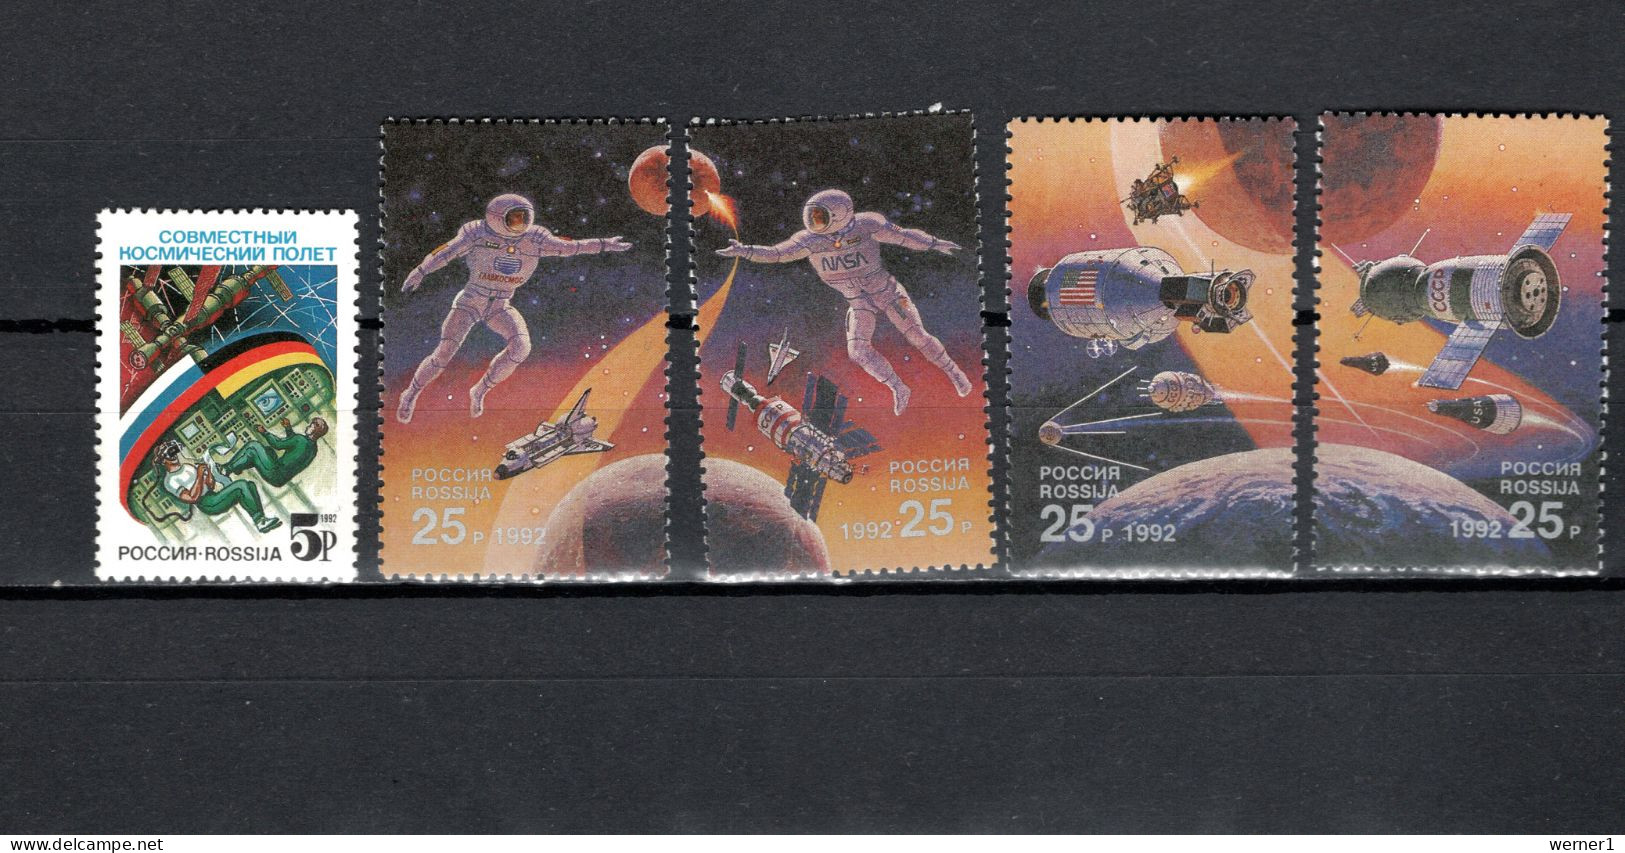 Russia 1992 Space, Russia-Germany Joint Spaceflight, Int. Space Year 5 Stamps MNH - Rusia & URSS